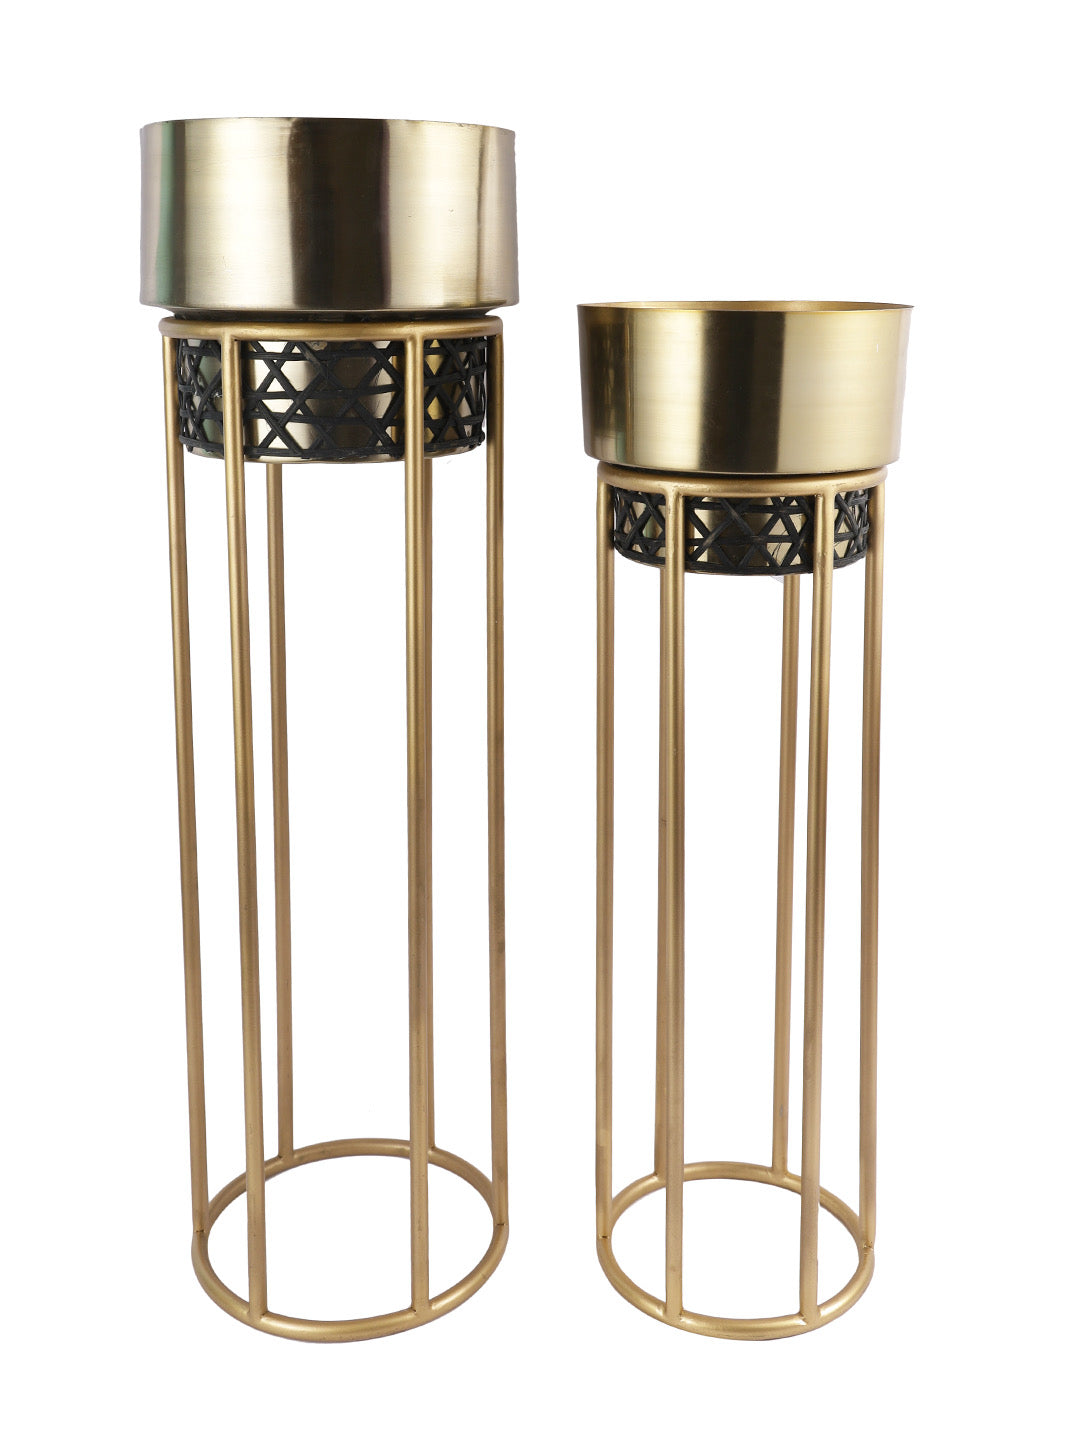 Set of 2 Golden Planters with Stand - Default Title (CHM2207_2)